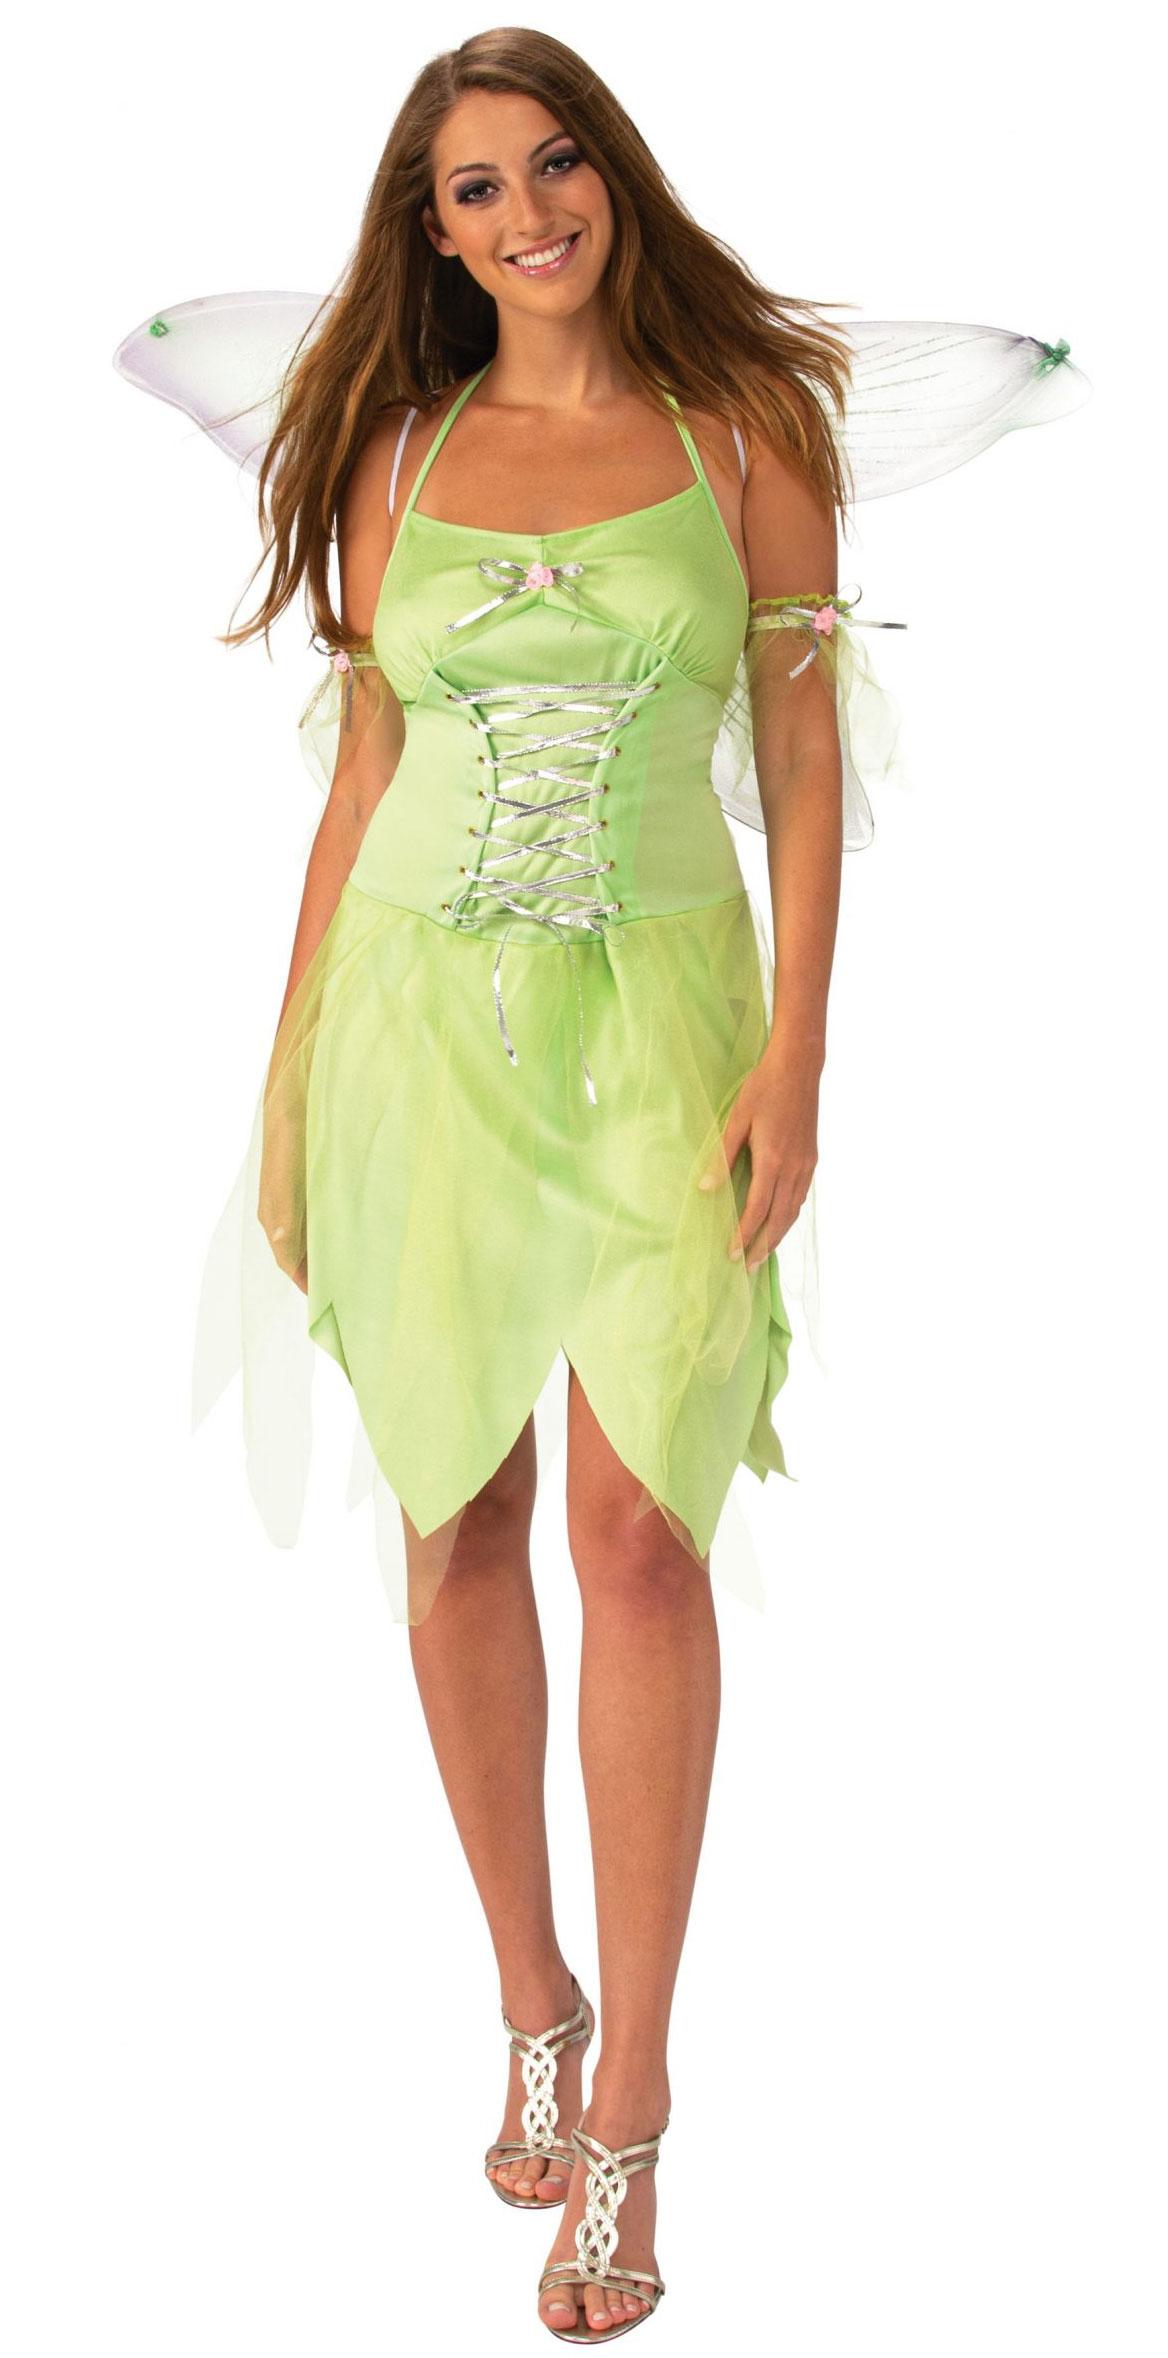 Adult Green Fairy Costume by Bristol Novelties AC704 available here at Karnival Costumes online party shop